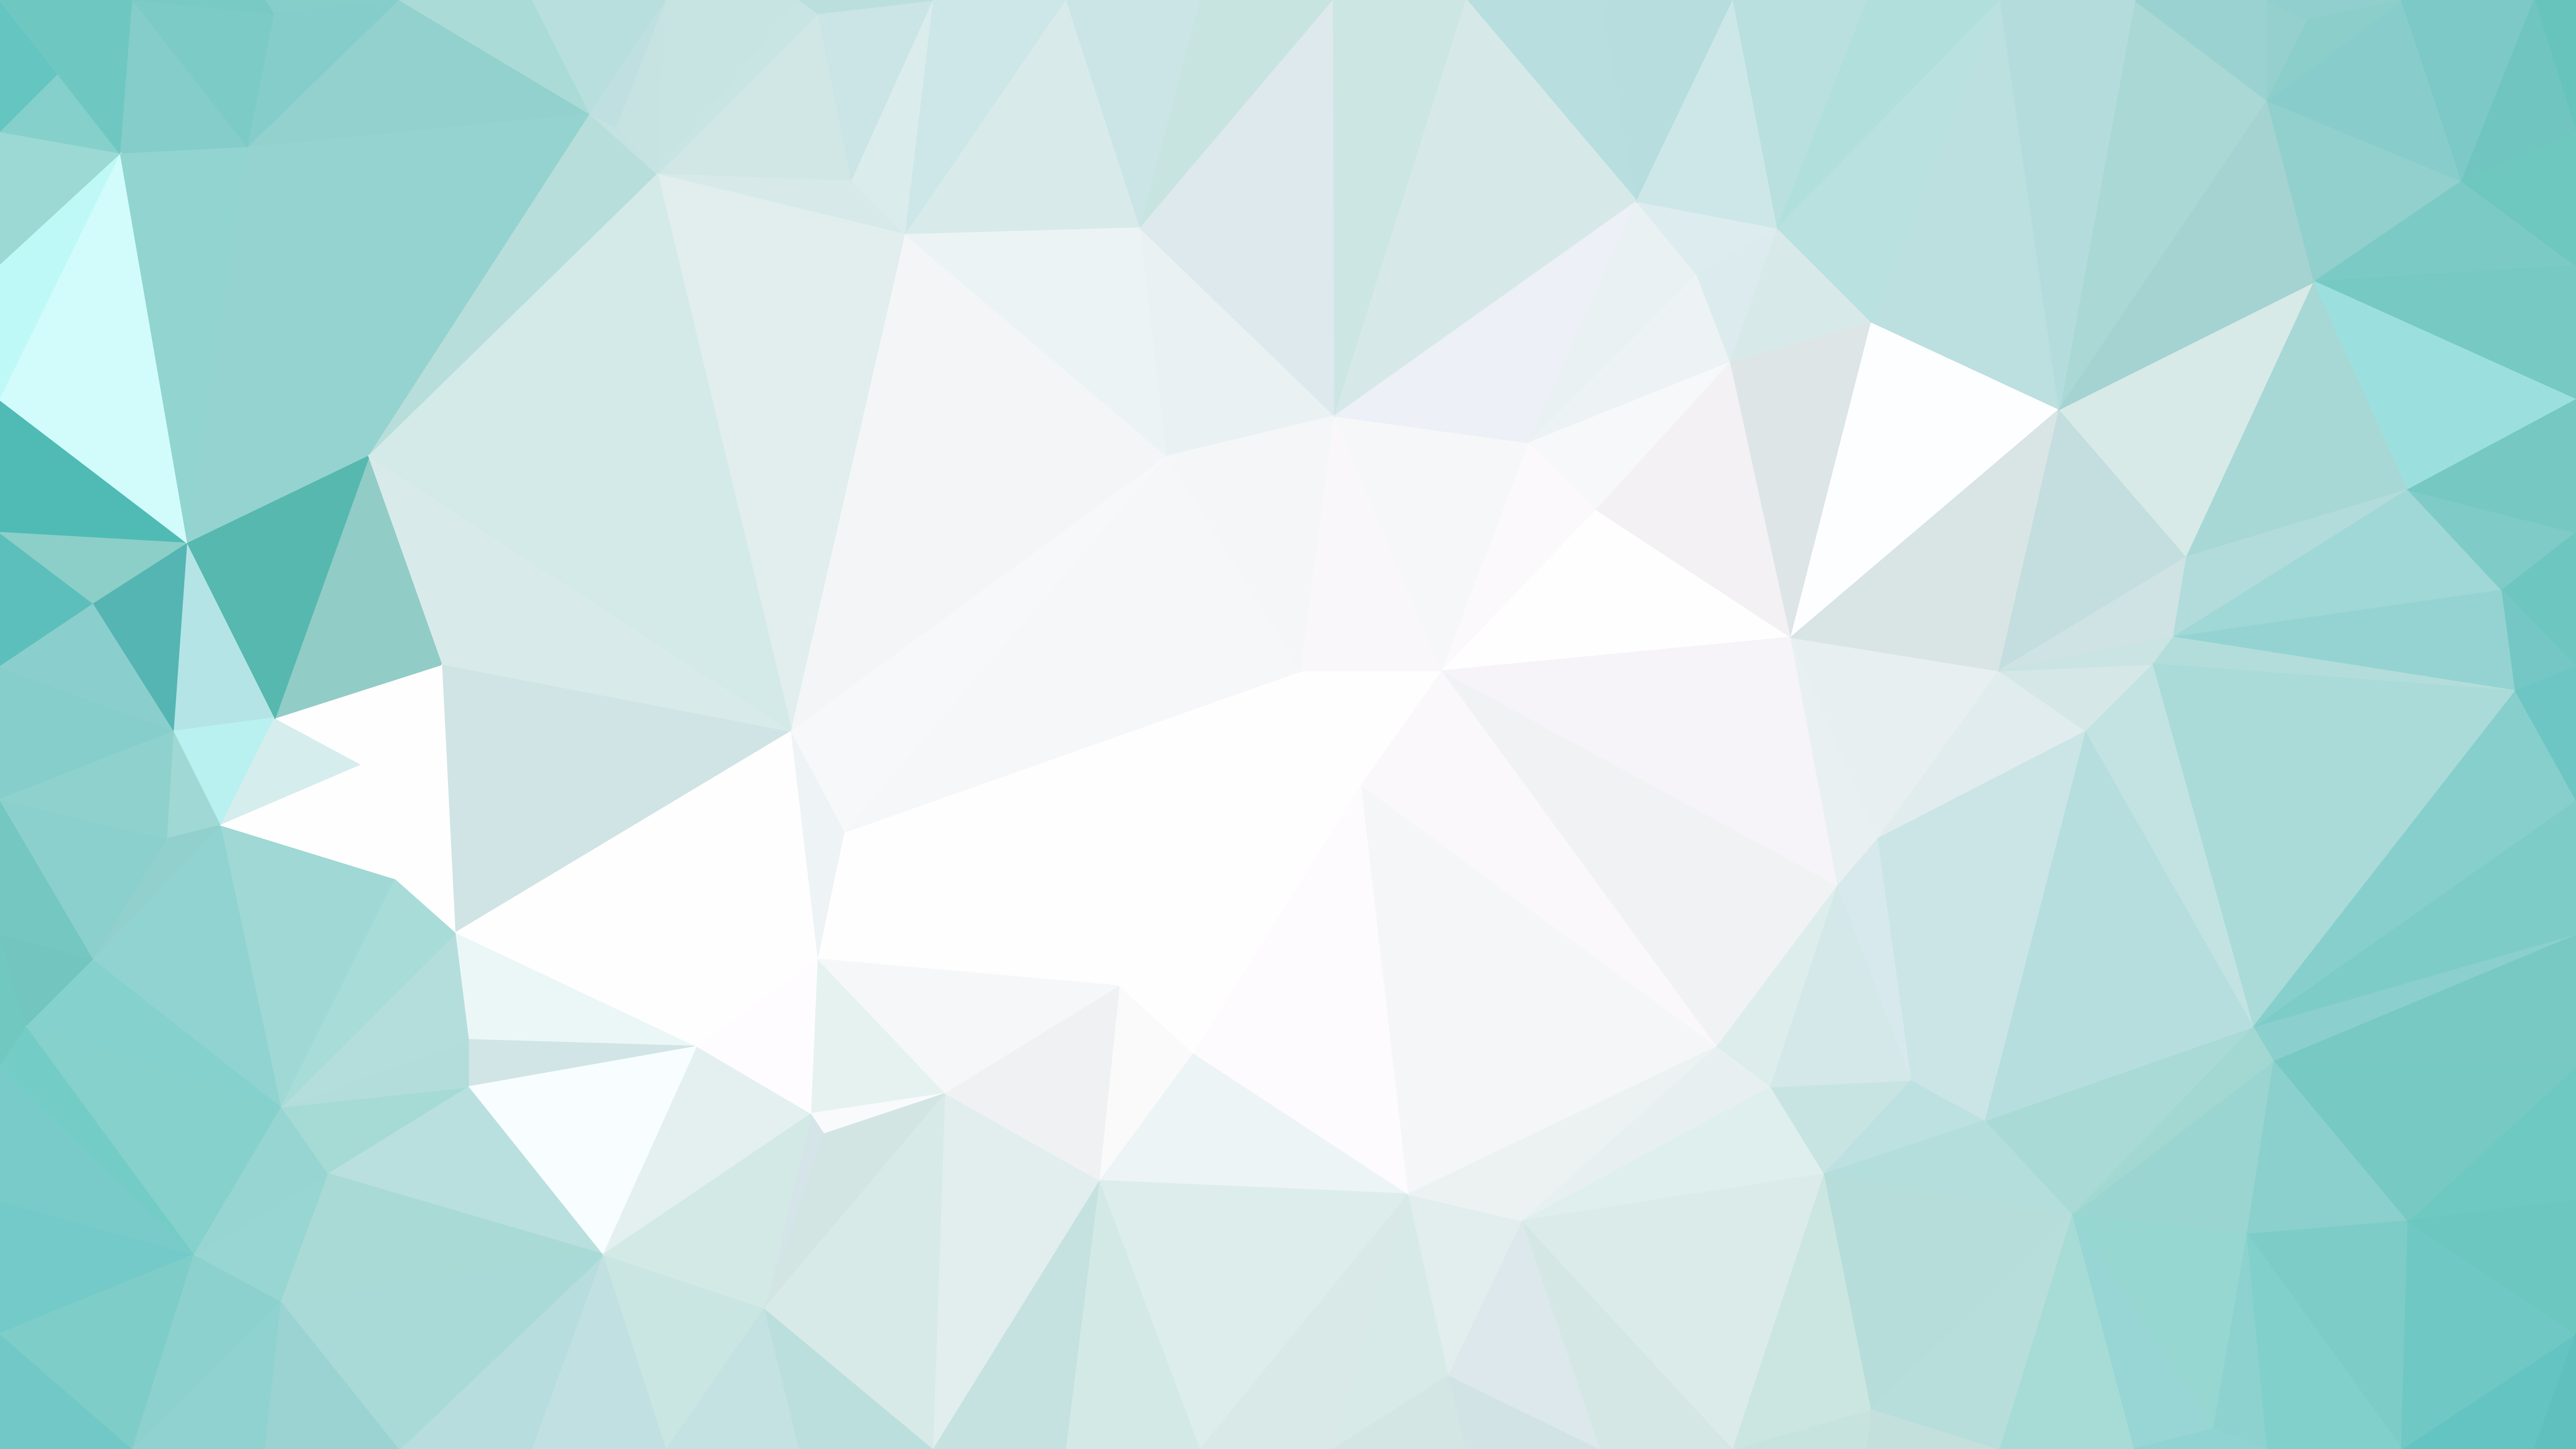 Free Turquoise and White Low Poly Background Template Vector Graphic